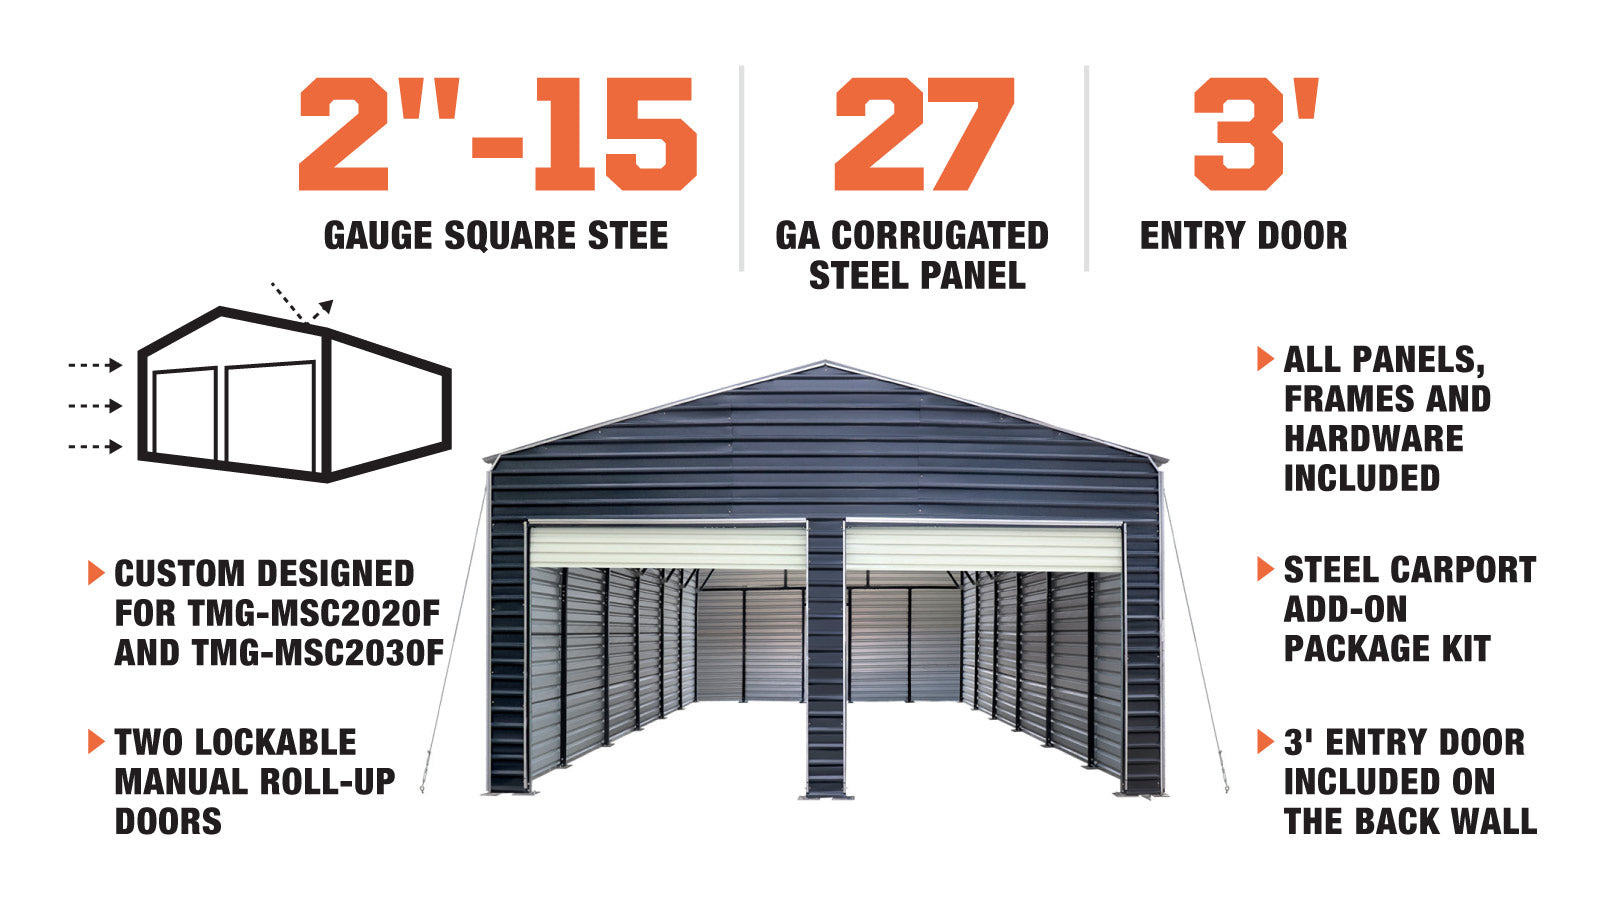 TMG Industrial Metal Shed Carport Add-On Package Kit For TMG-MSC2020F And TMG-MSC2030F , Front Wall w/Roll Up Doors & Back Wall, TMG-MSC20-RD12-description-image